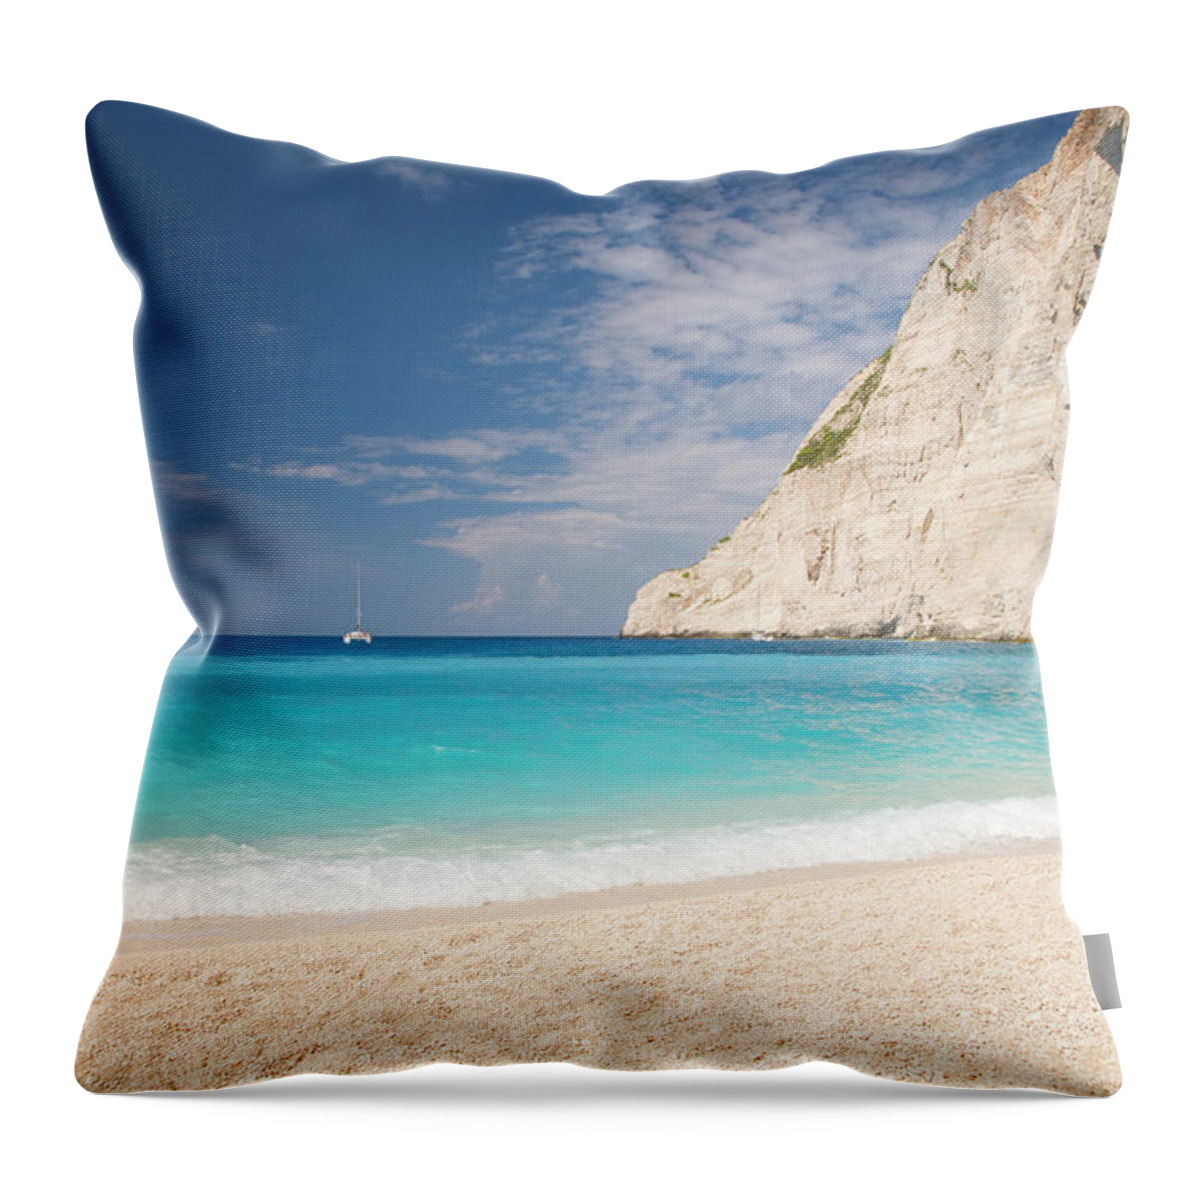 Water's Edge Throw Pillow featuring the photograph View From Beach, Navagio Bay #1 by David C Tomlinson